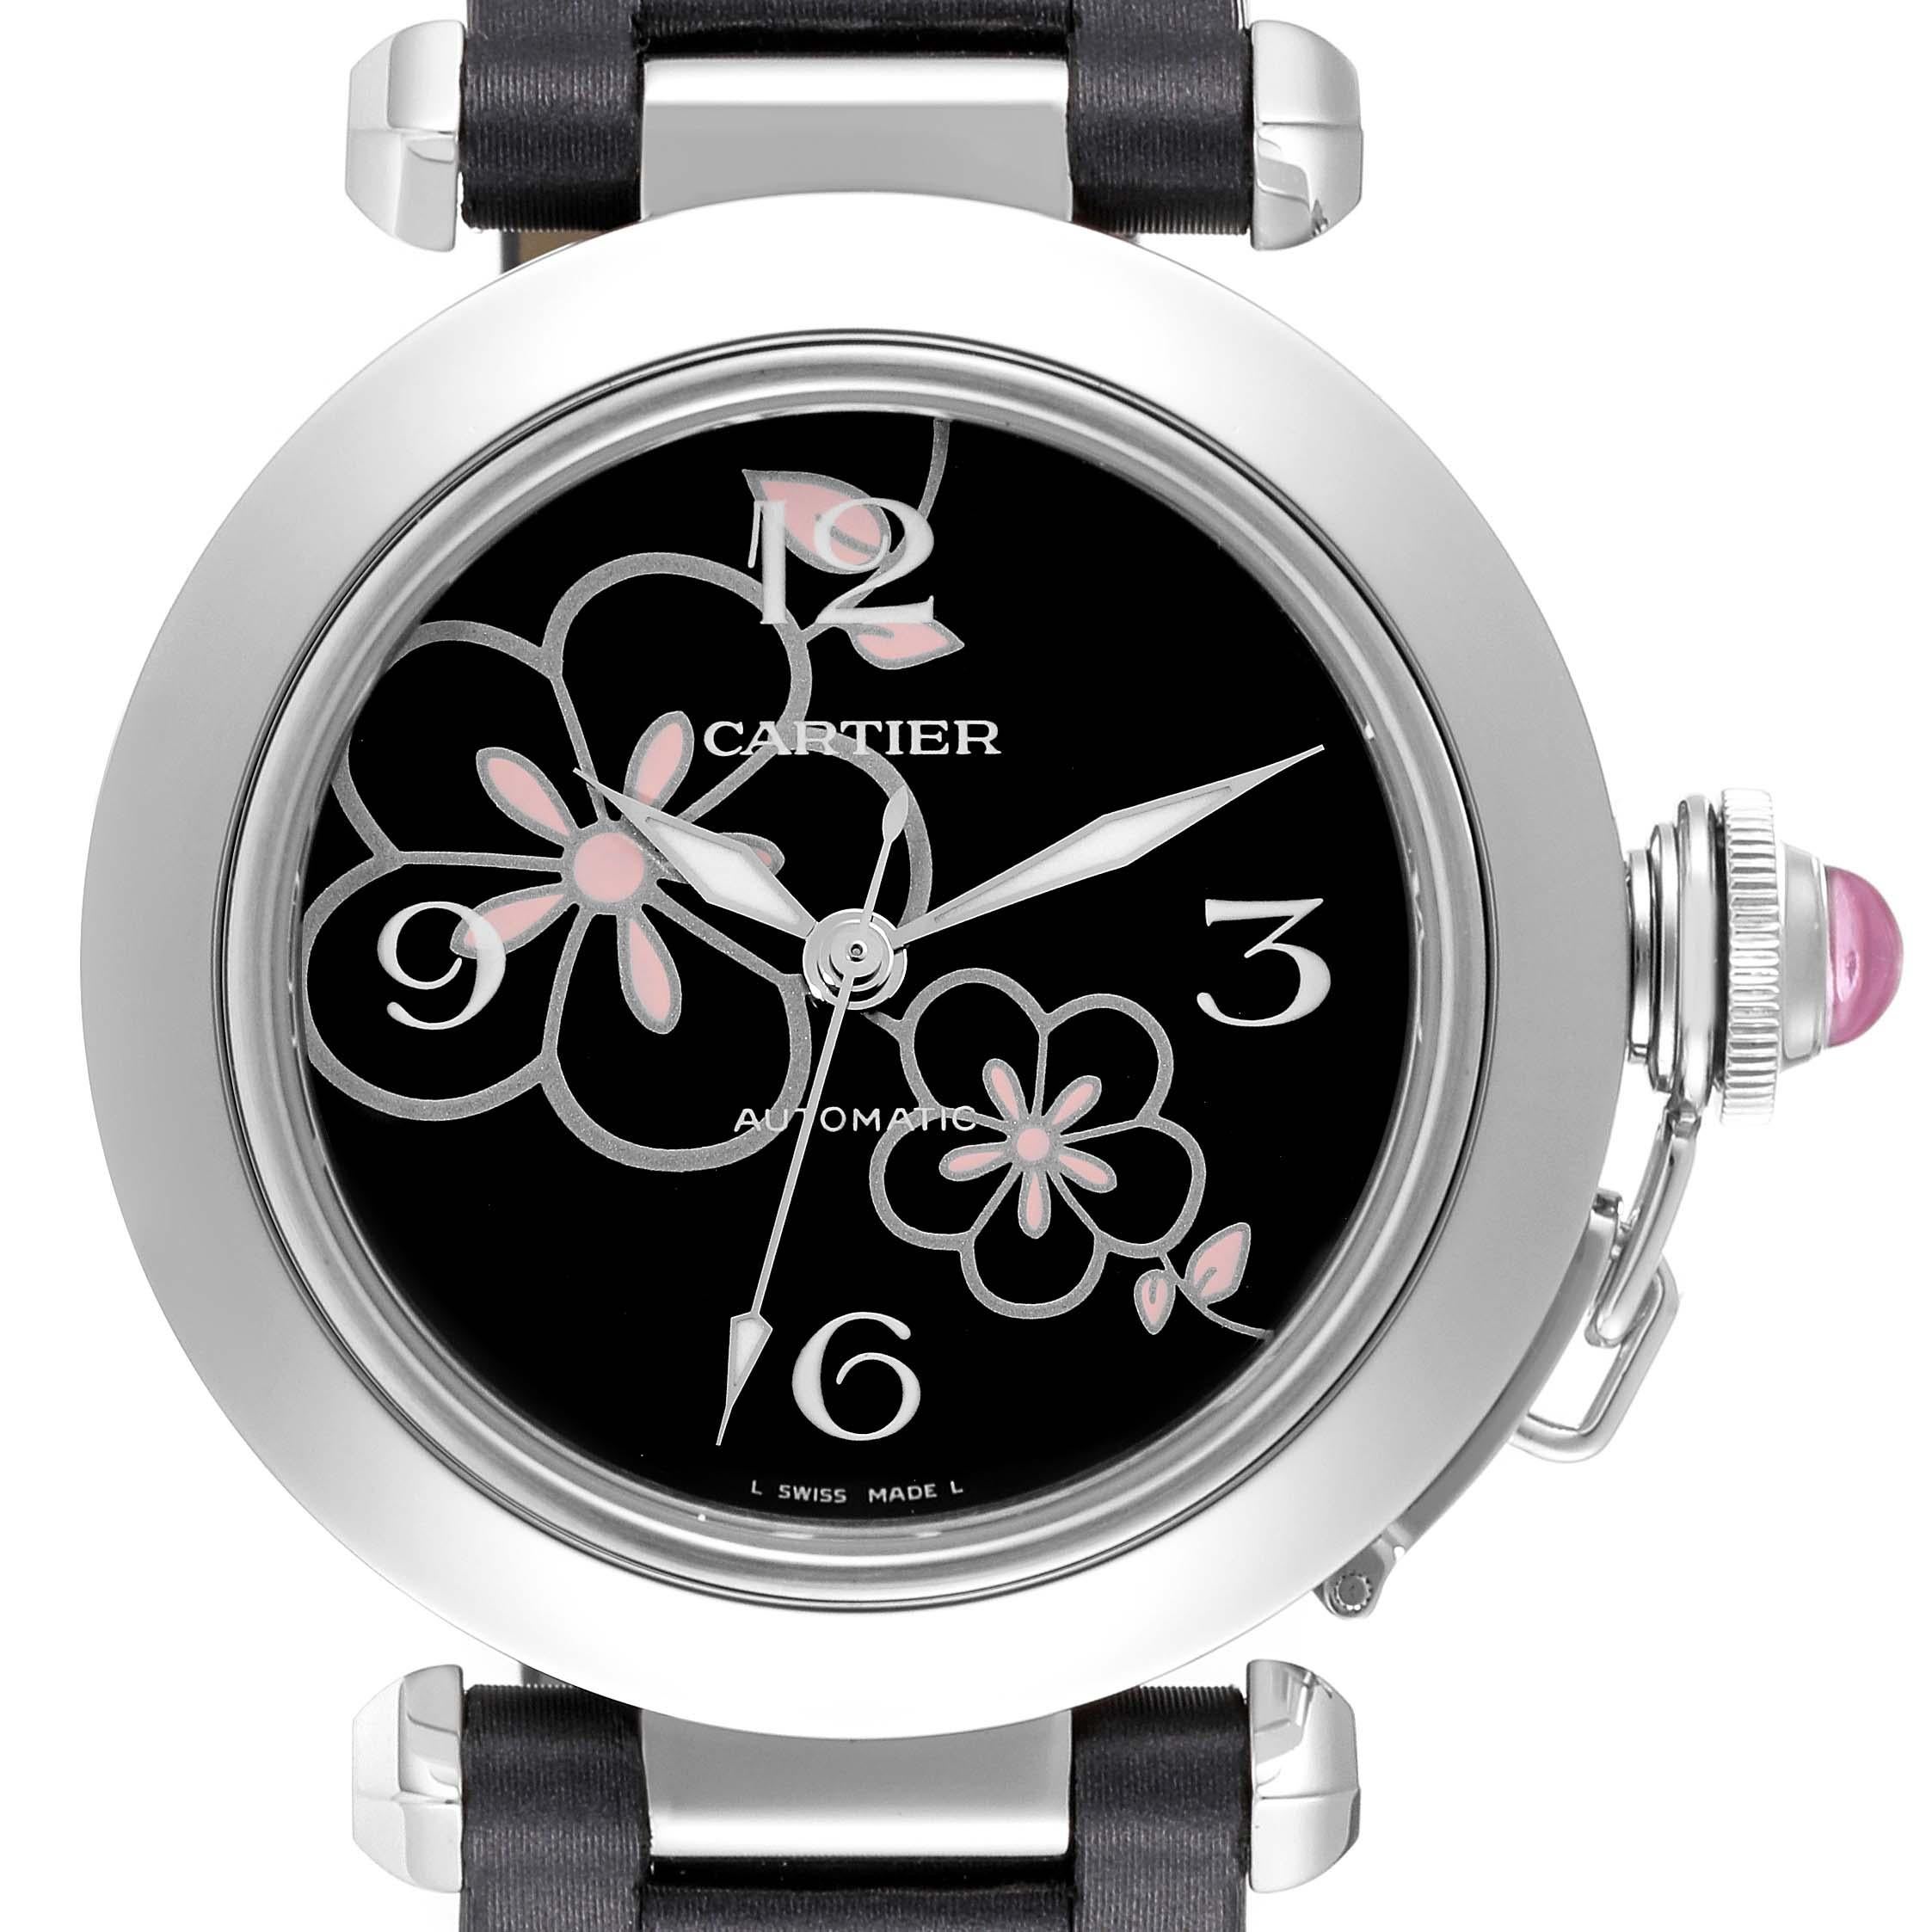 Cartier Pasha C Flower Dial Limited Edition Steel Ladies Watch W3109699. Automatic self-winding movement. Round three-body polished and brushed stainless steel case 35.0 mm in diameter. Case back with 8 screws. Vendome lugs. Winding-crown protection